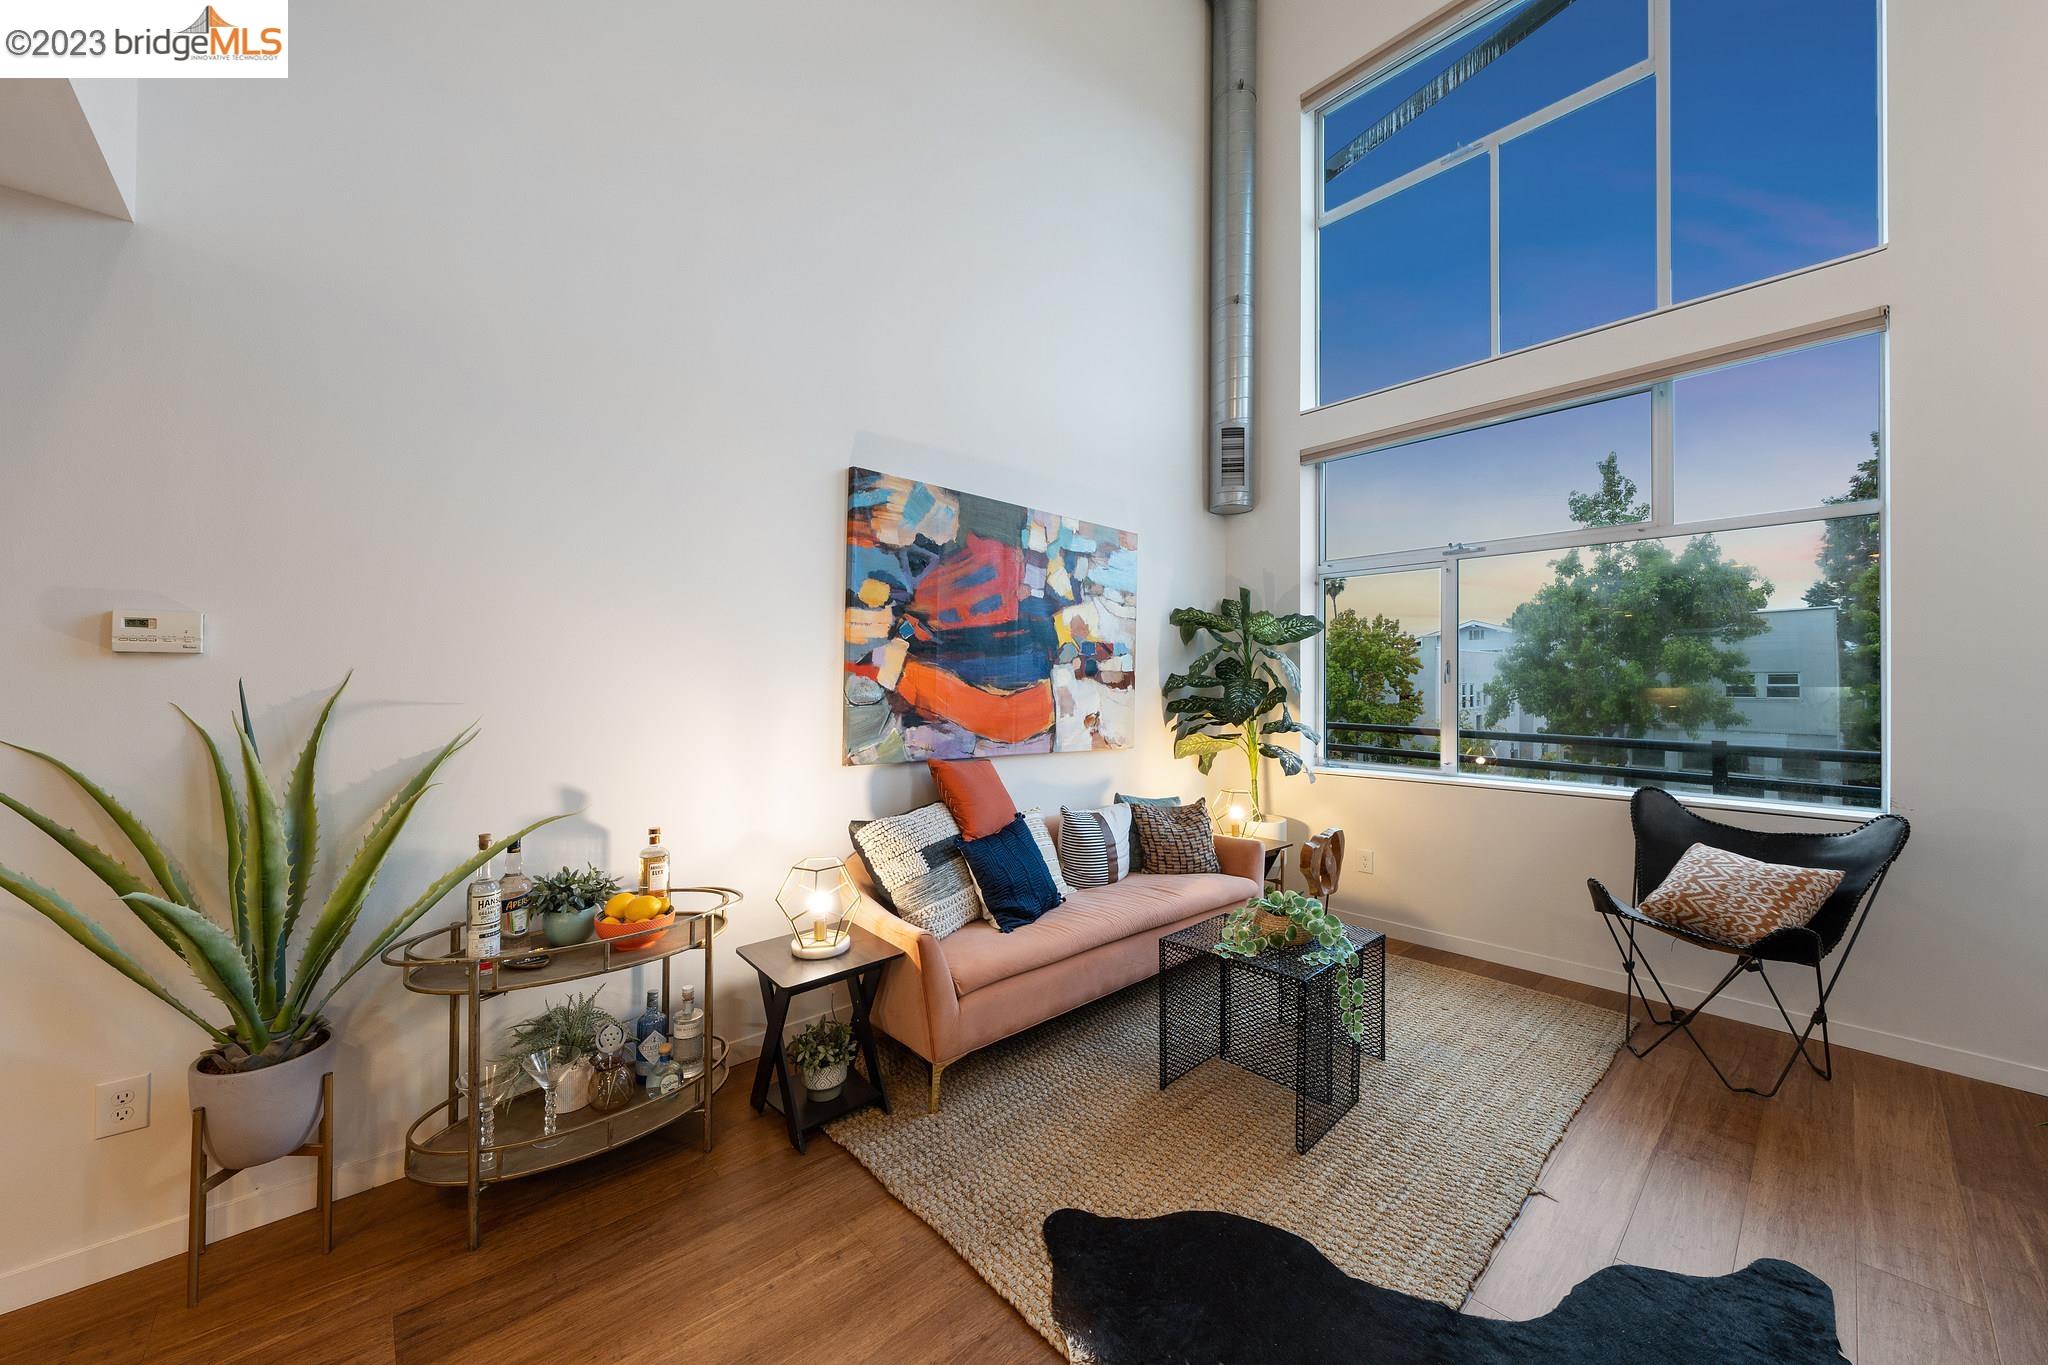 Light & bright loft-style 2 story living meets Berkeley’s Elmwood Loft. Built in 2006 w/ a 2023 designer refresh, this move-in ready space spans 1,102 SF w/ 2 bedrooms & 1.5 baths. Thoughtful layout w/ 1 bedroom & full bath downstairs, & an open loft & 2nd bedroom upstairs w/  1/2 bath & sliding door to balcony w/ Berkeley Hills views – perfect for a roommate setup or just for you. An open kitchen/living/dining concept w/ soaring ceilings & oversized windows beam in sunlight, complementing the industrial feel of the main level. In the kitchen, you’ll find all-new quartz countertops & stainless steel range, black cabinets & a dramatic quartz backsplash. New flooring, new plumbing fixtures in kitchen & bathroom sinks, new door hardware, new lighting throughout, a new kitchen pantry & updated bathrooms w/ new designer quartz countertops, mirrors, faucets, lighting & tile floors are among the upgrades & updates bringing the home into move-in ready condition. Additional features include in unit washer/ dryer, a detached private 1-car garage, a lobby for receiving packages & a common patio area for hanging out. 10-min walk to shops & restaurants on College Ave. 88 Walk score & 99 Bike Score make this condo a walker’s, cyclist’s & commuter’s paradise.  Run don't walk to see this one.